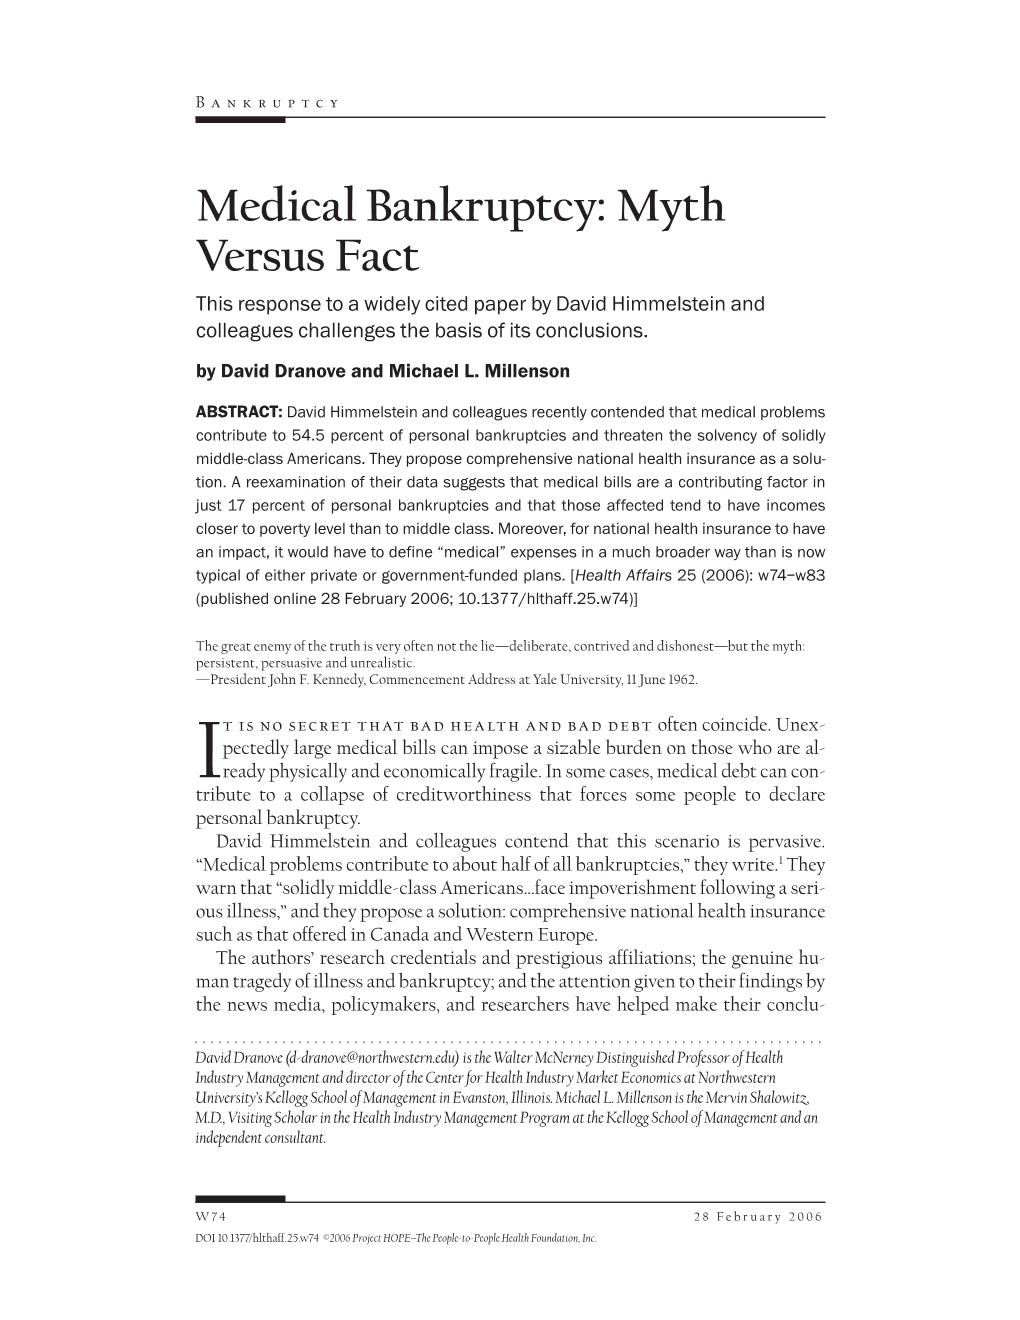 Medical Bankruptcy: Myth Versus Fact This Response to a Widely Cited Paper by David Himmelstein and Colleagues Challenges the Basis of Its Conclusions